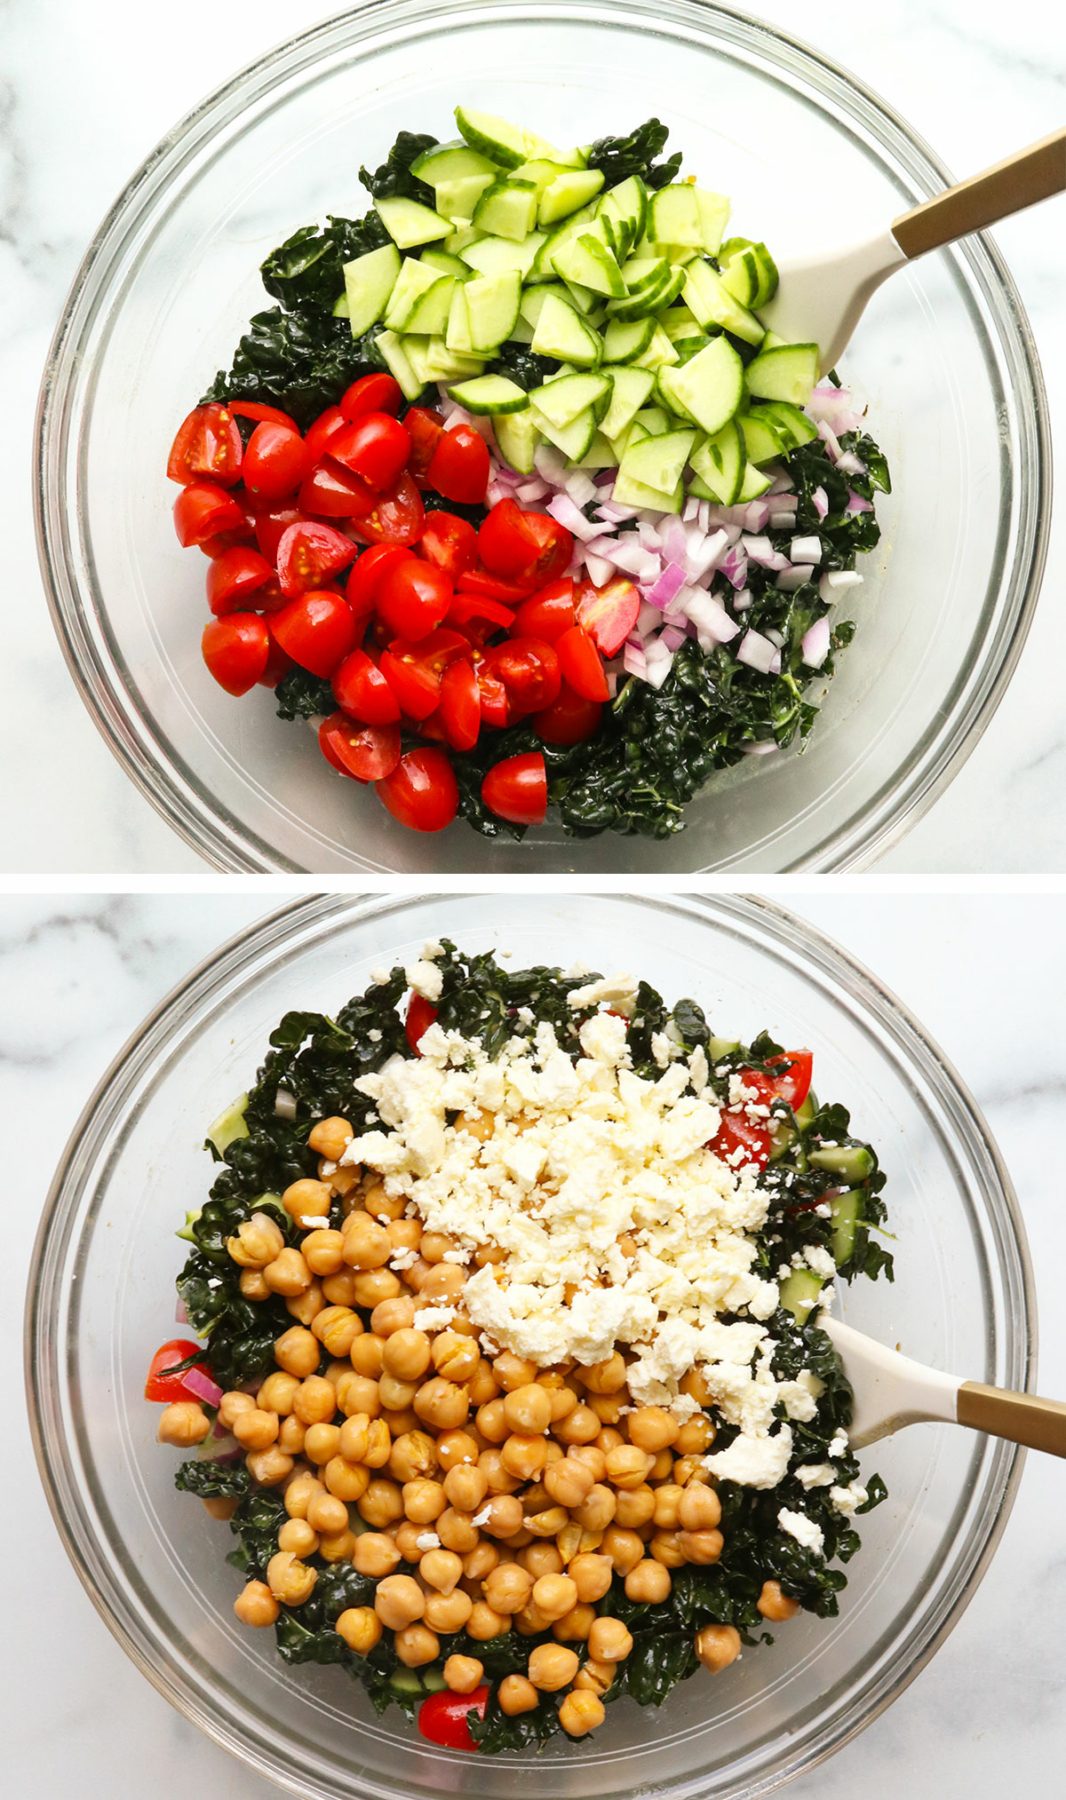 chopped veggies added to kale along with chickpeas and feta. 